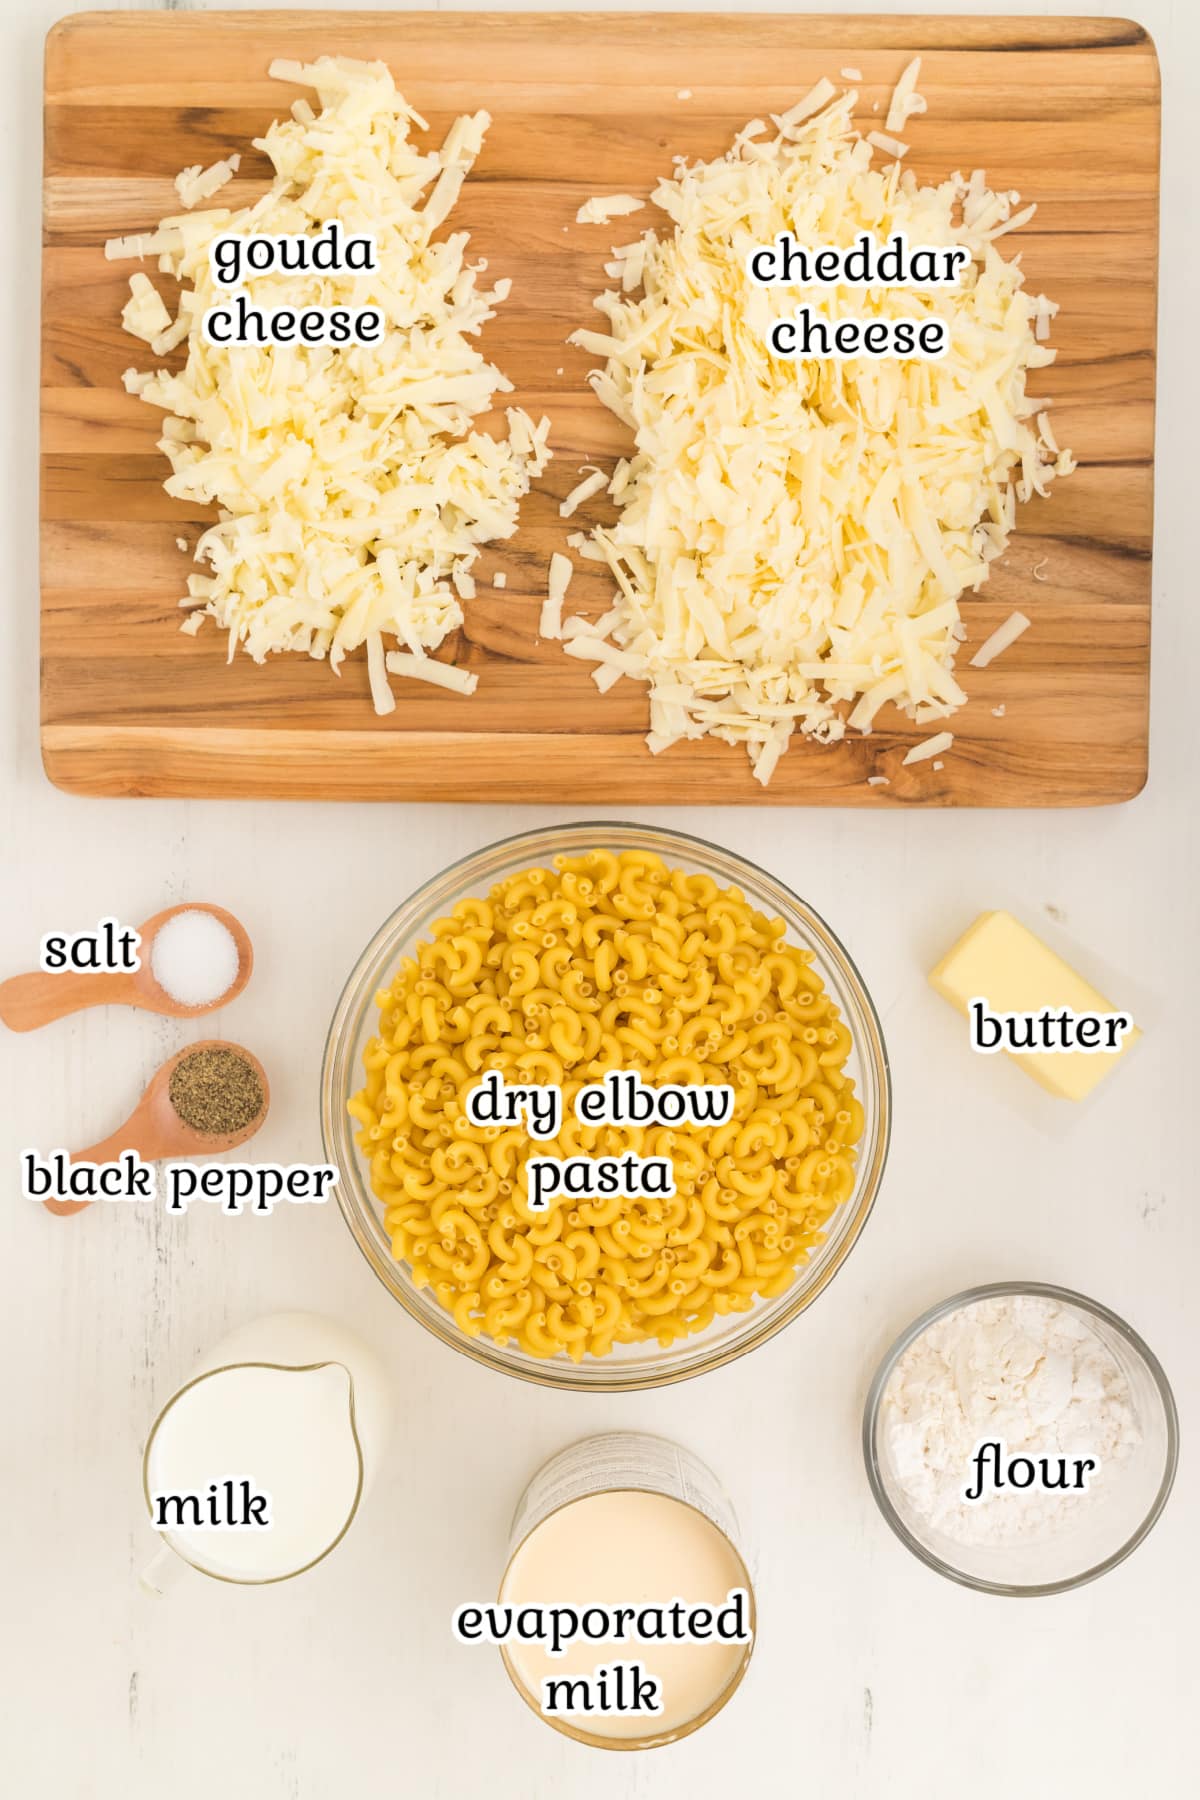 Gouda mac and cheese recipe ingredients on a countertop.